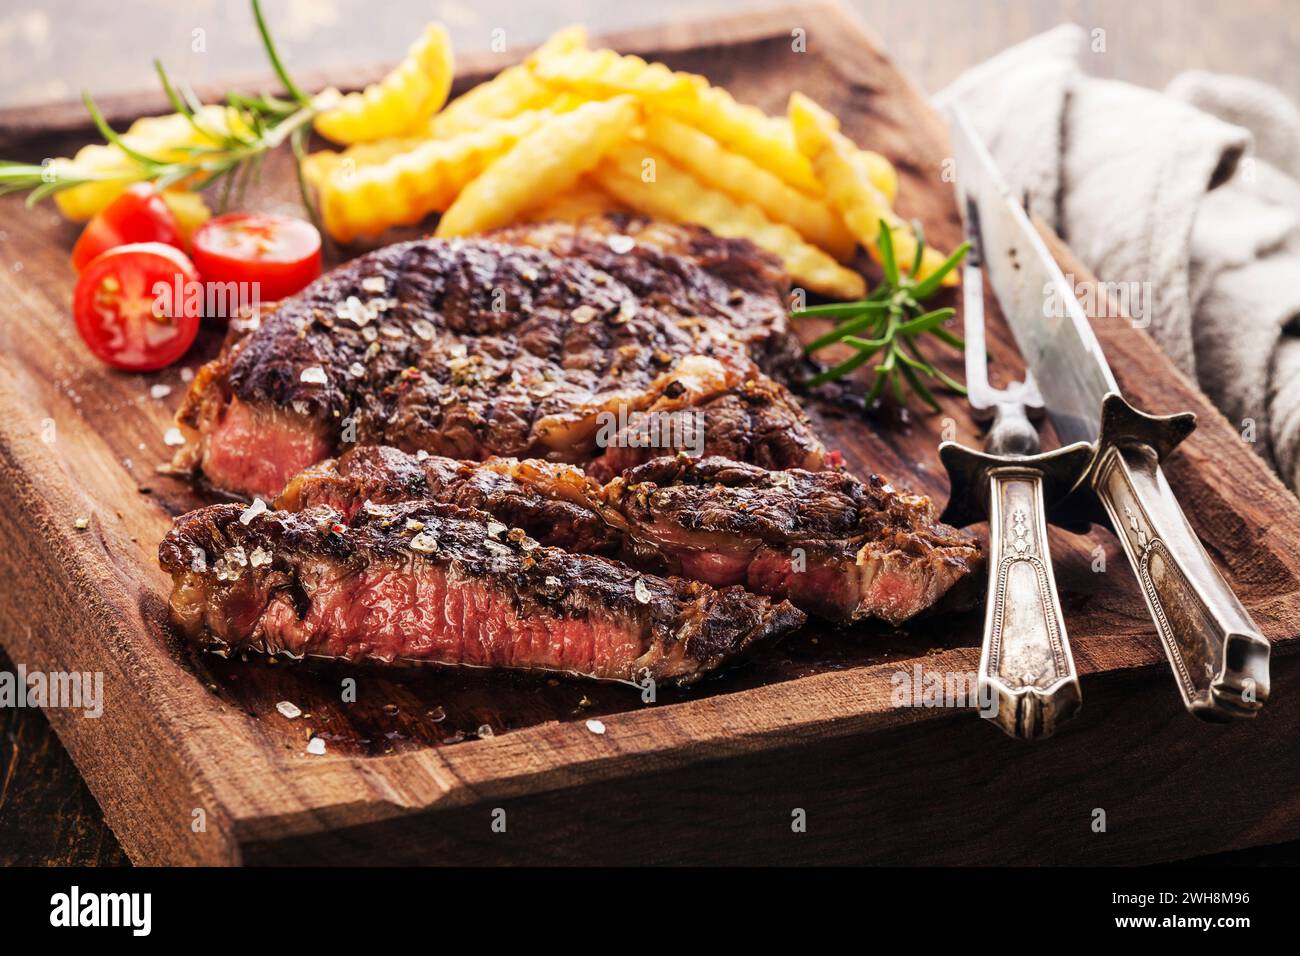 Sliced medium rare grilled Steak Ribeye Black Angus with french fries on serving board block Stock Photo